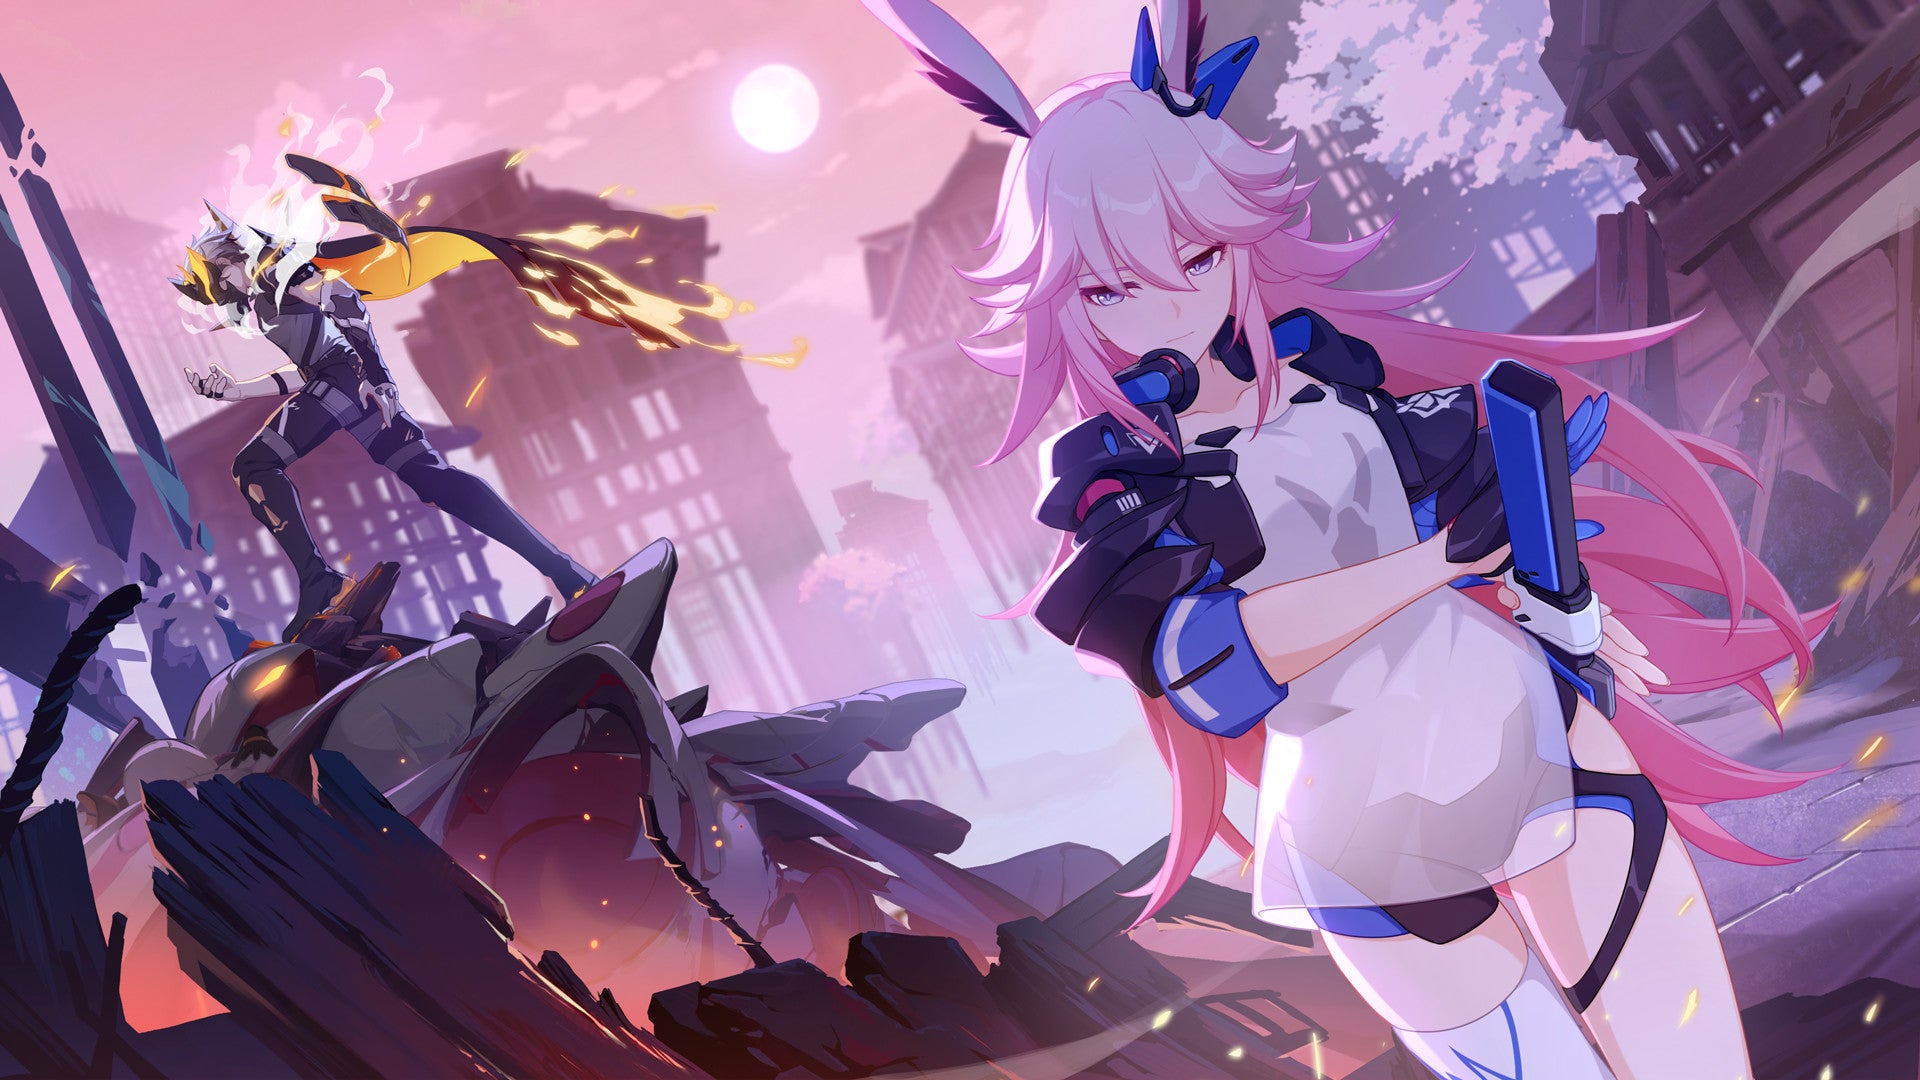 Honkai Impact 3rd Live Wallpapers Feature 13 Flame-Chasers - Siliconera